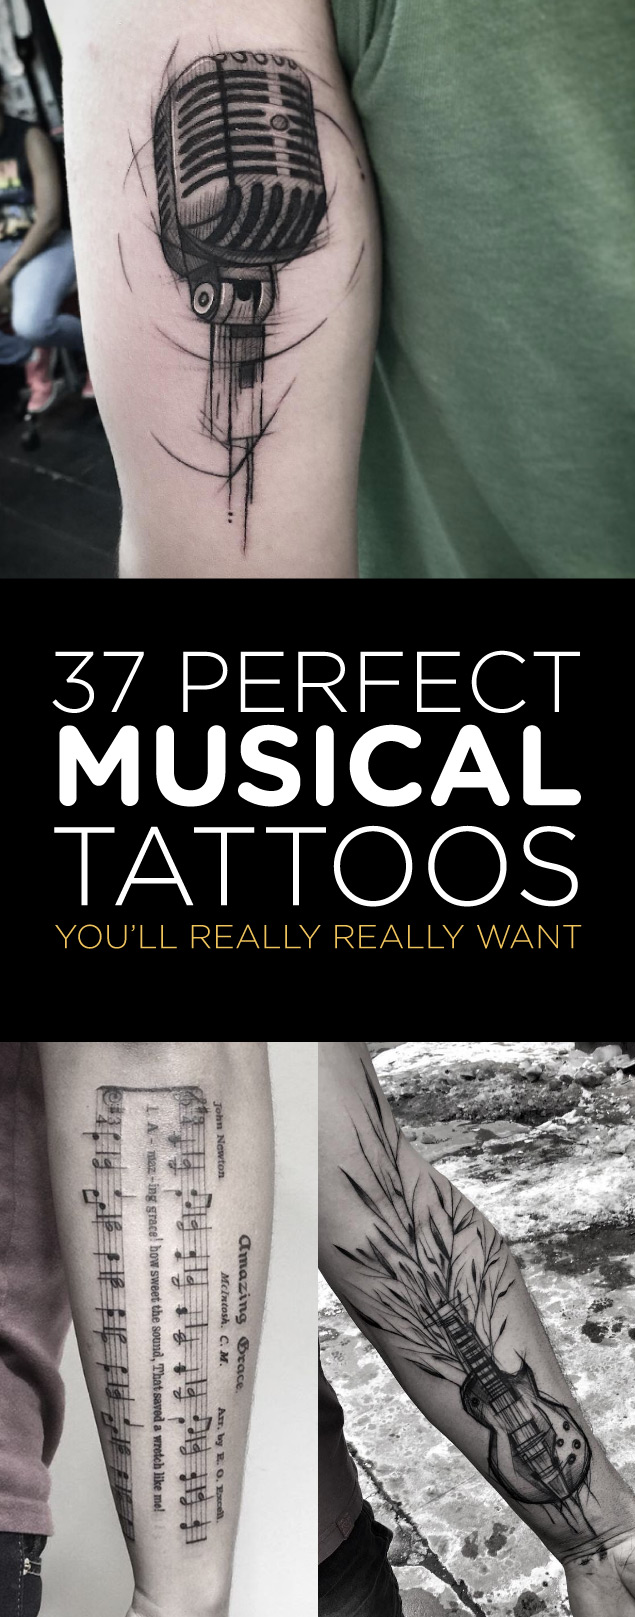 37 Perfect Musical Tattoos You'll Really Really Want